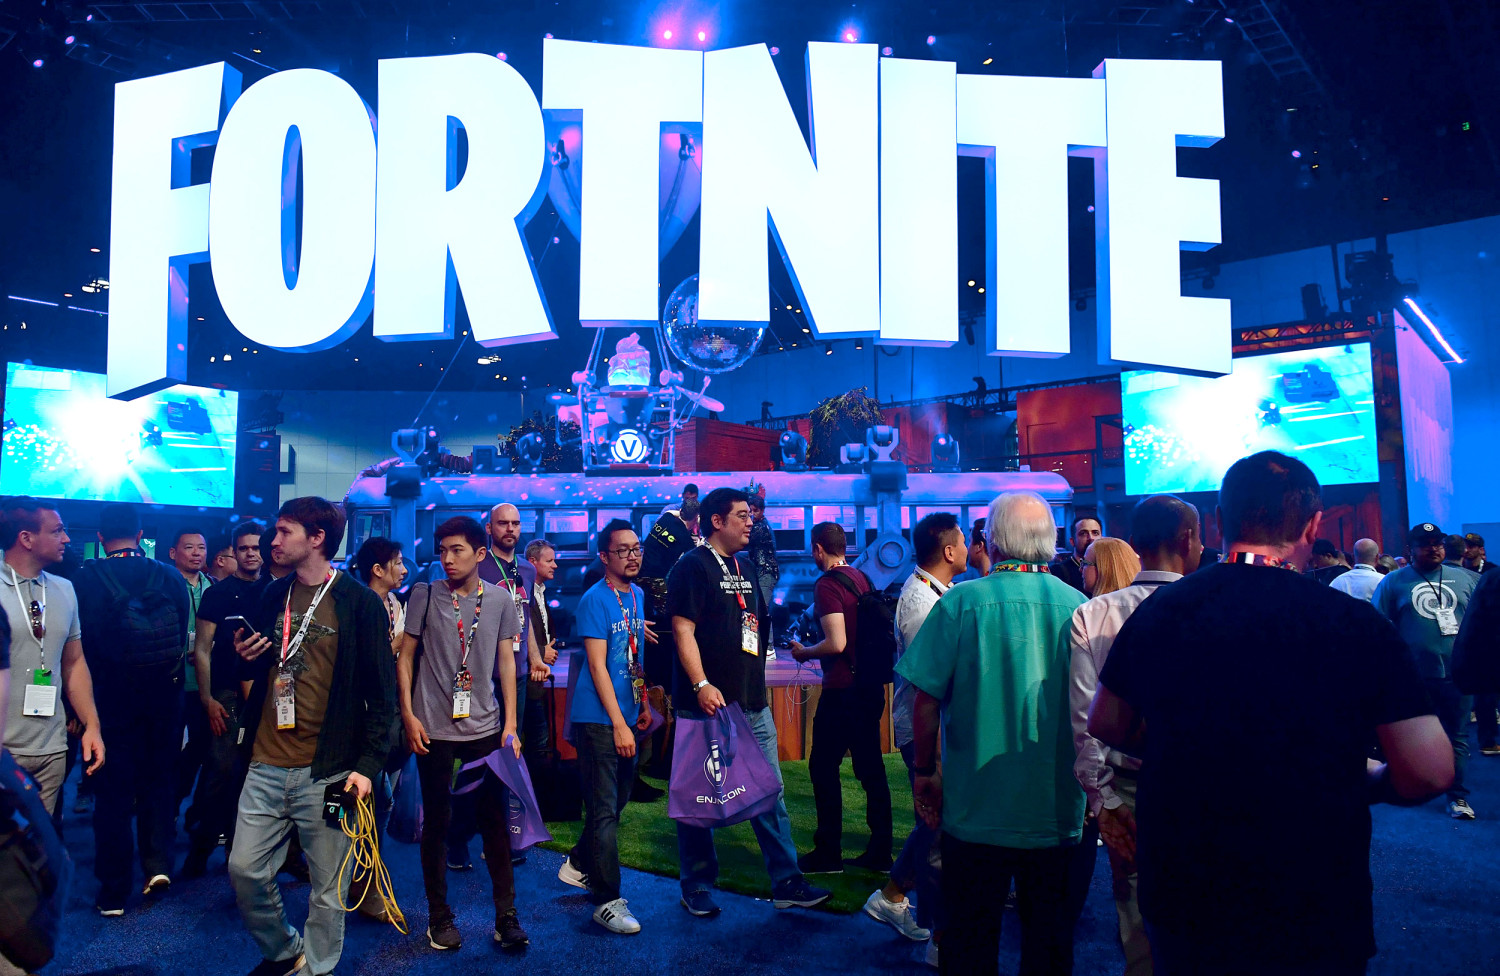 Fortnite was the Most Downloaded Free Game on PlayStation in